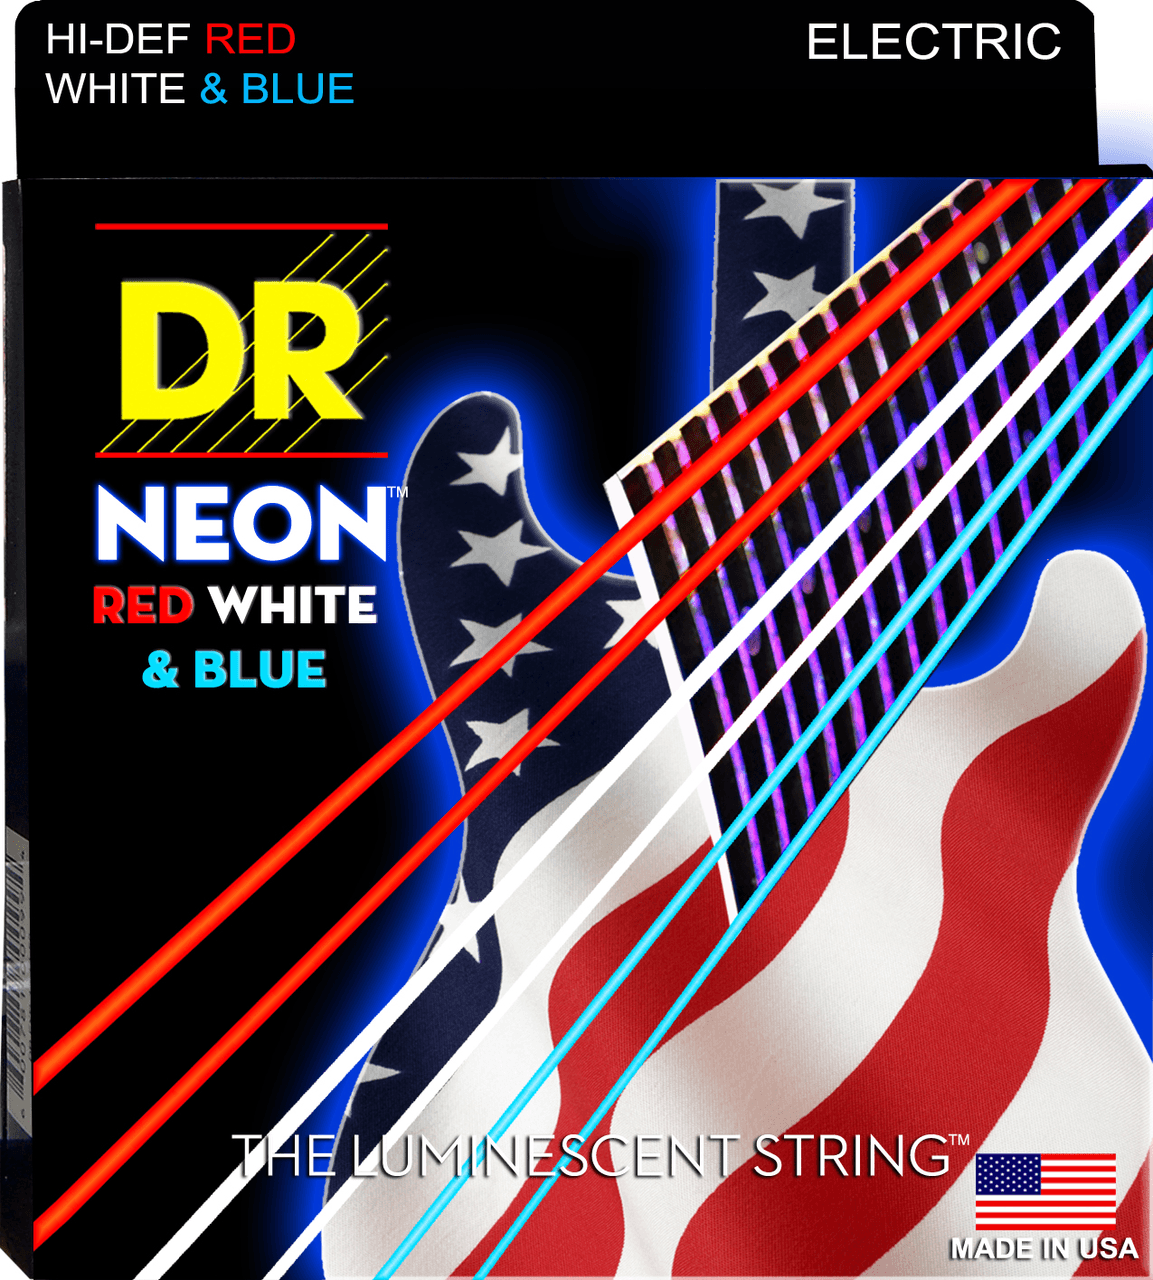 Red White and Blue C Logo - DR Red White & Blue Electric Strings